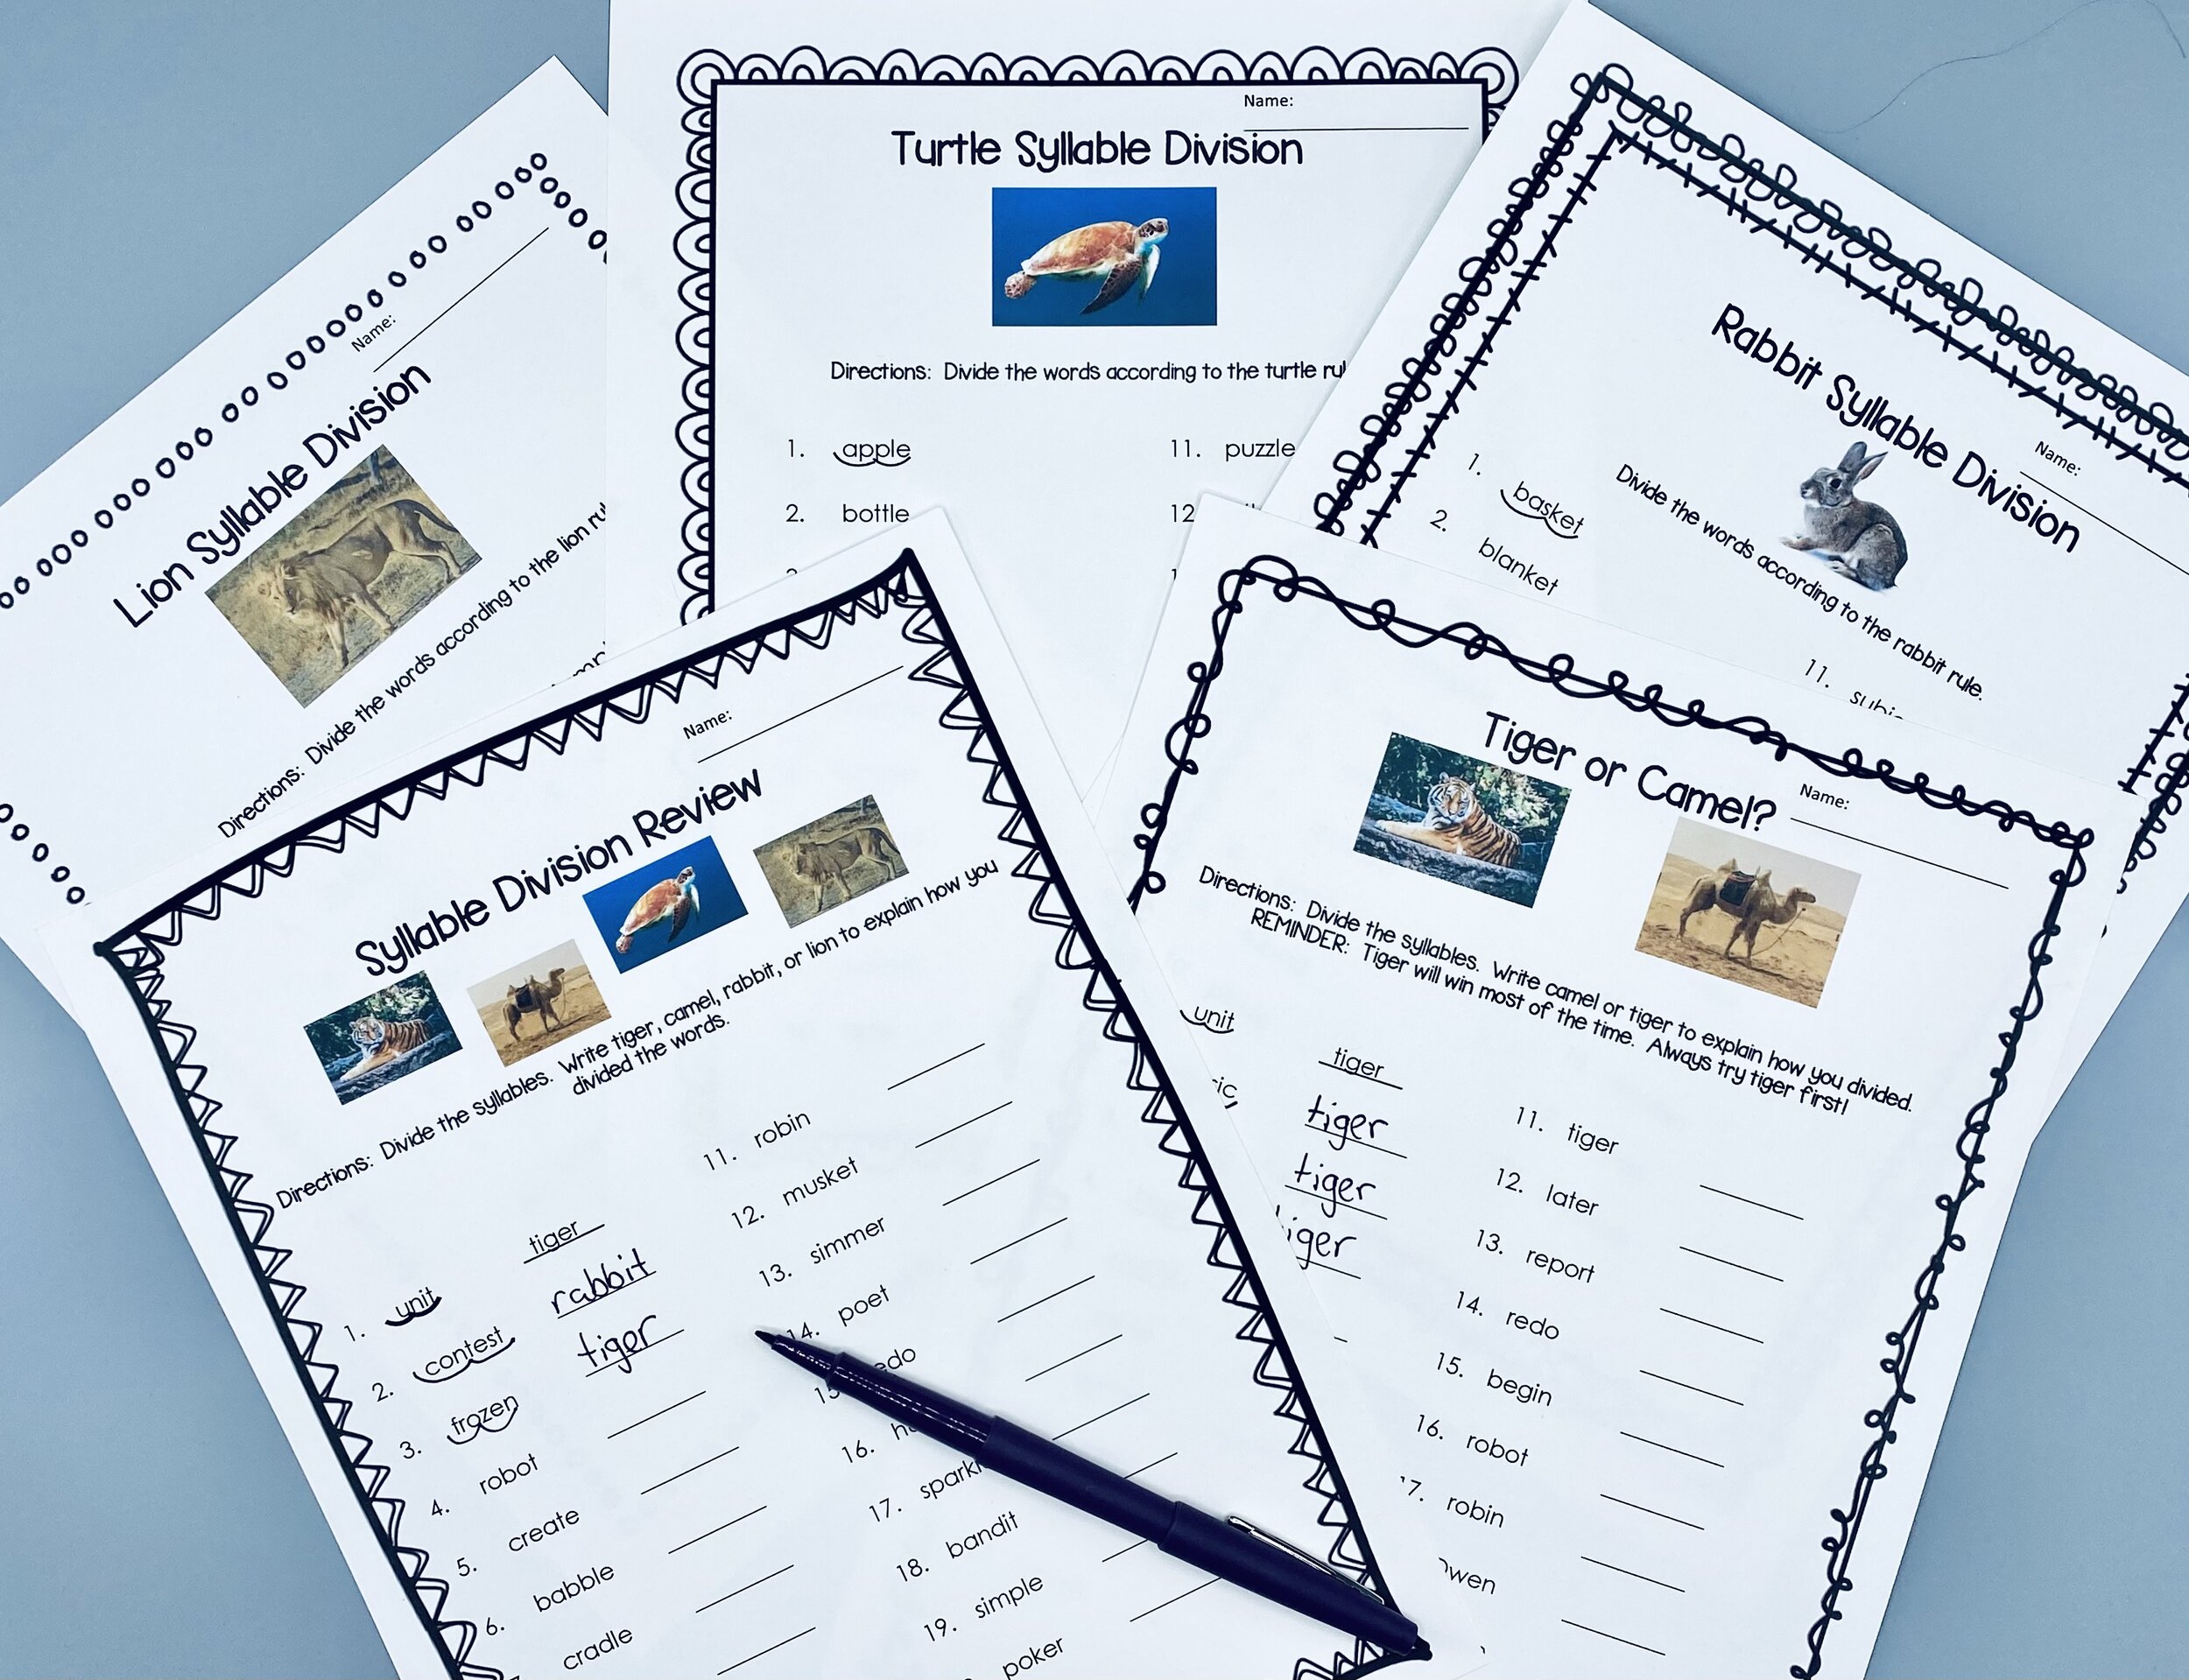 Check out the FREE syllable division worksheets and posters in my TPT store!